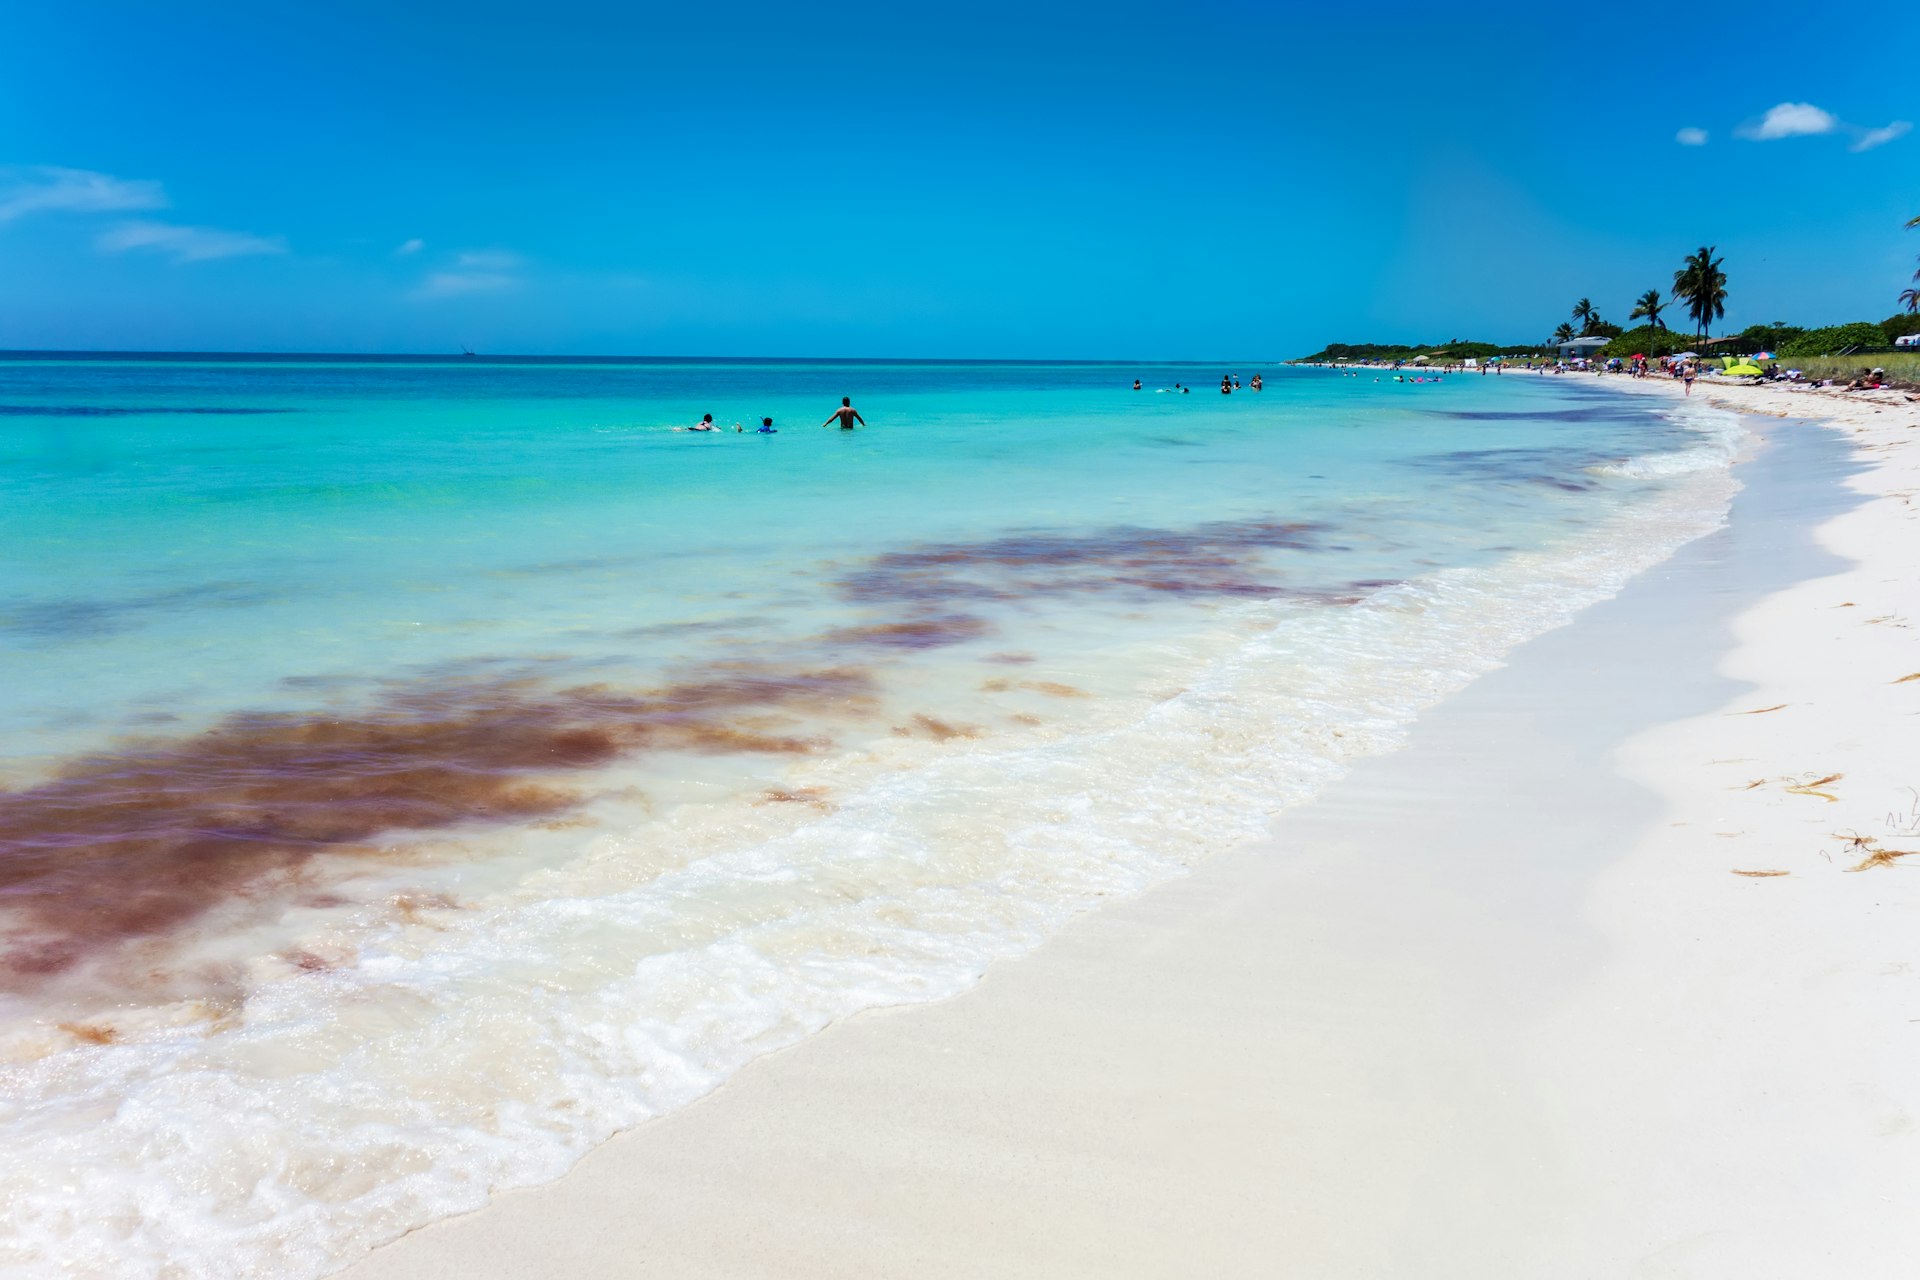 A vast beach and shallow turquoise waters dotted with swimmers